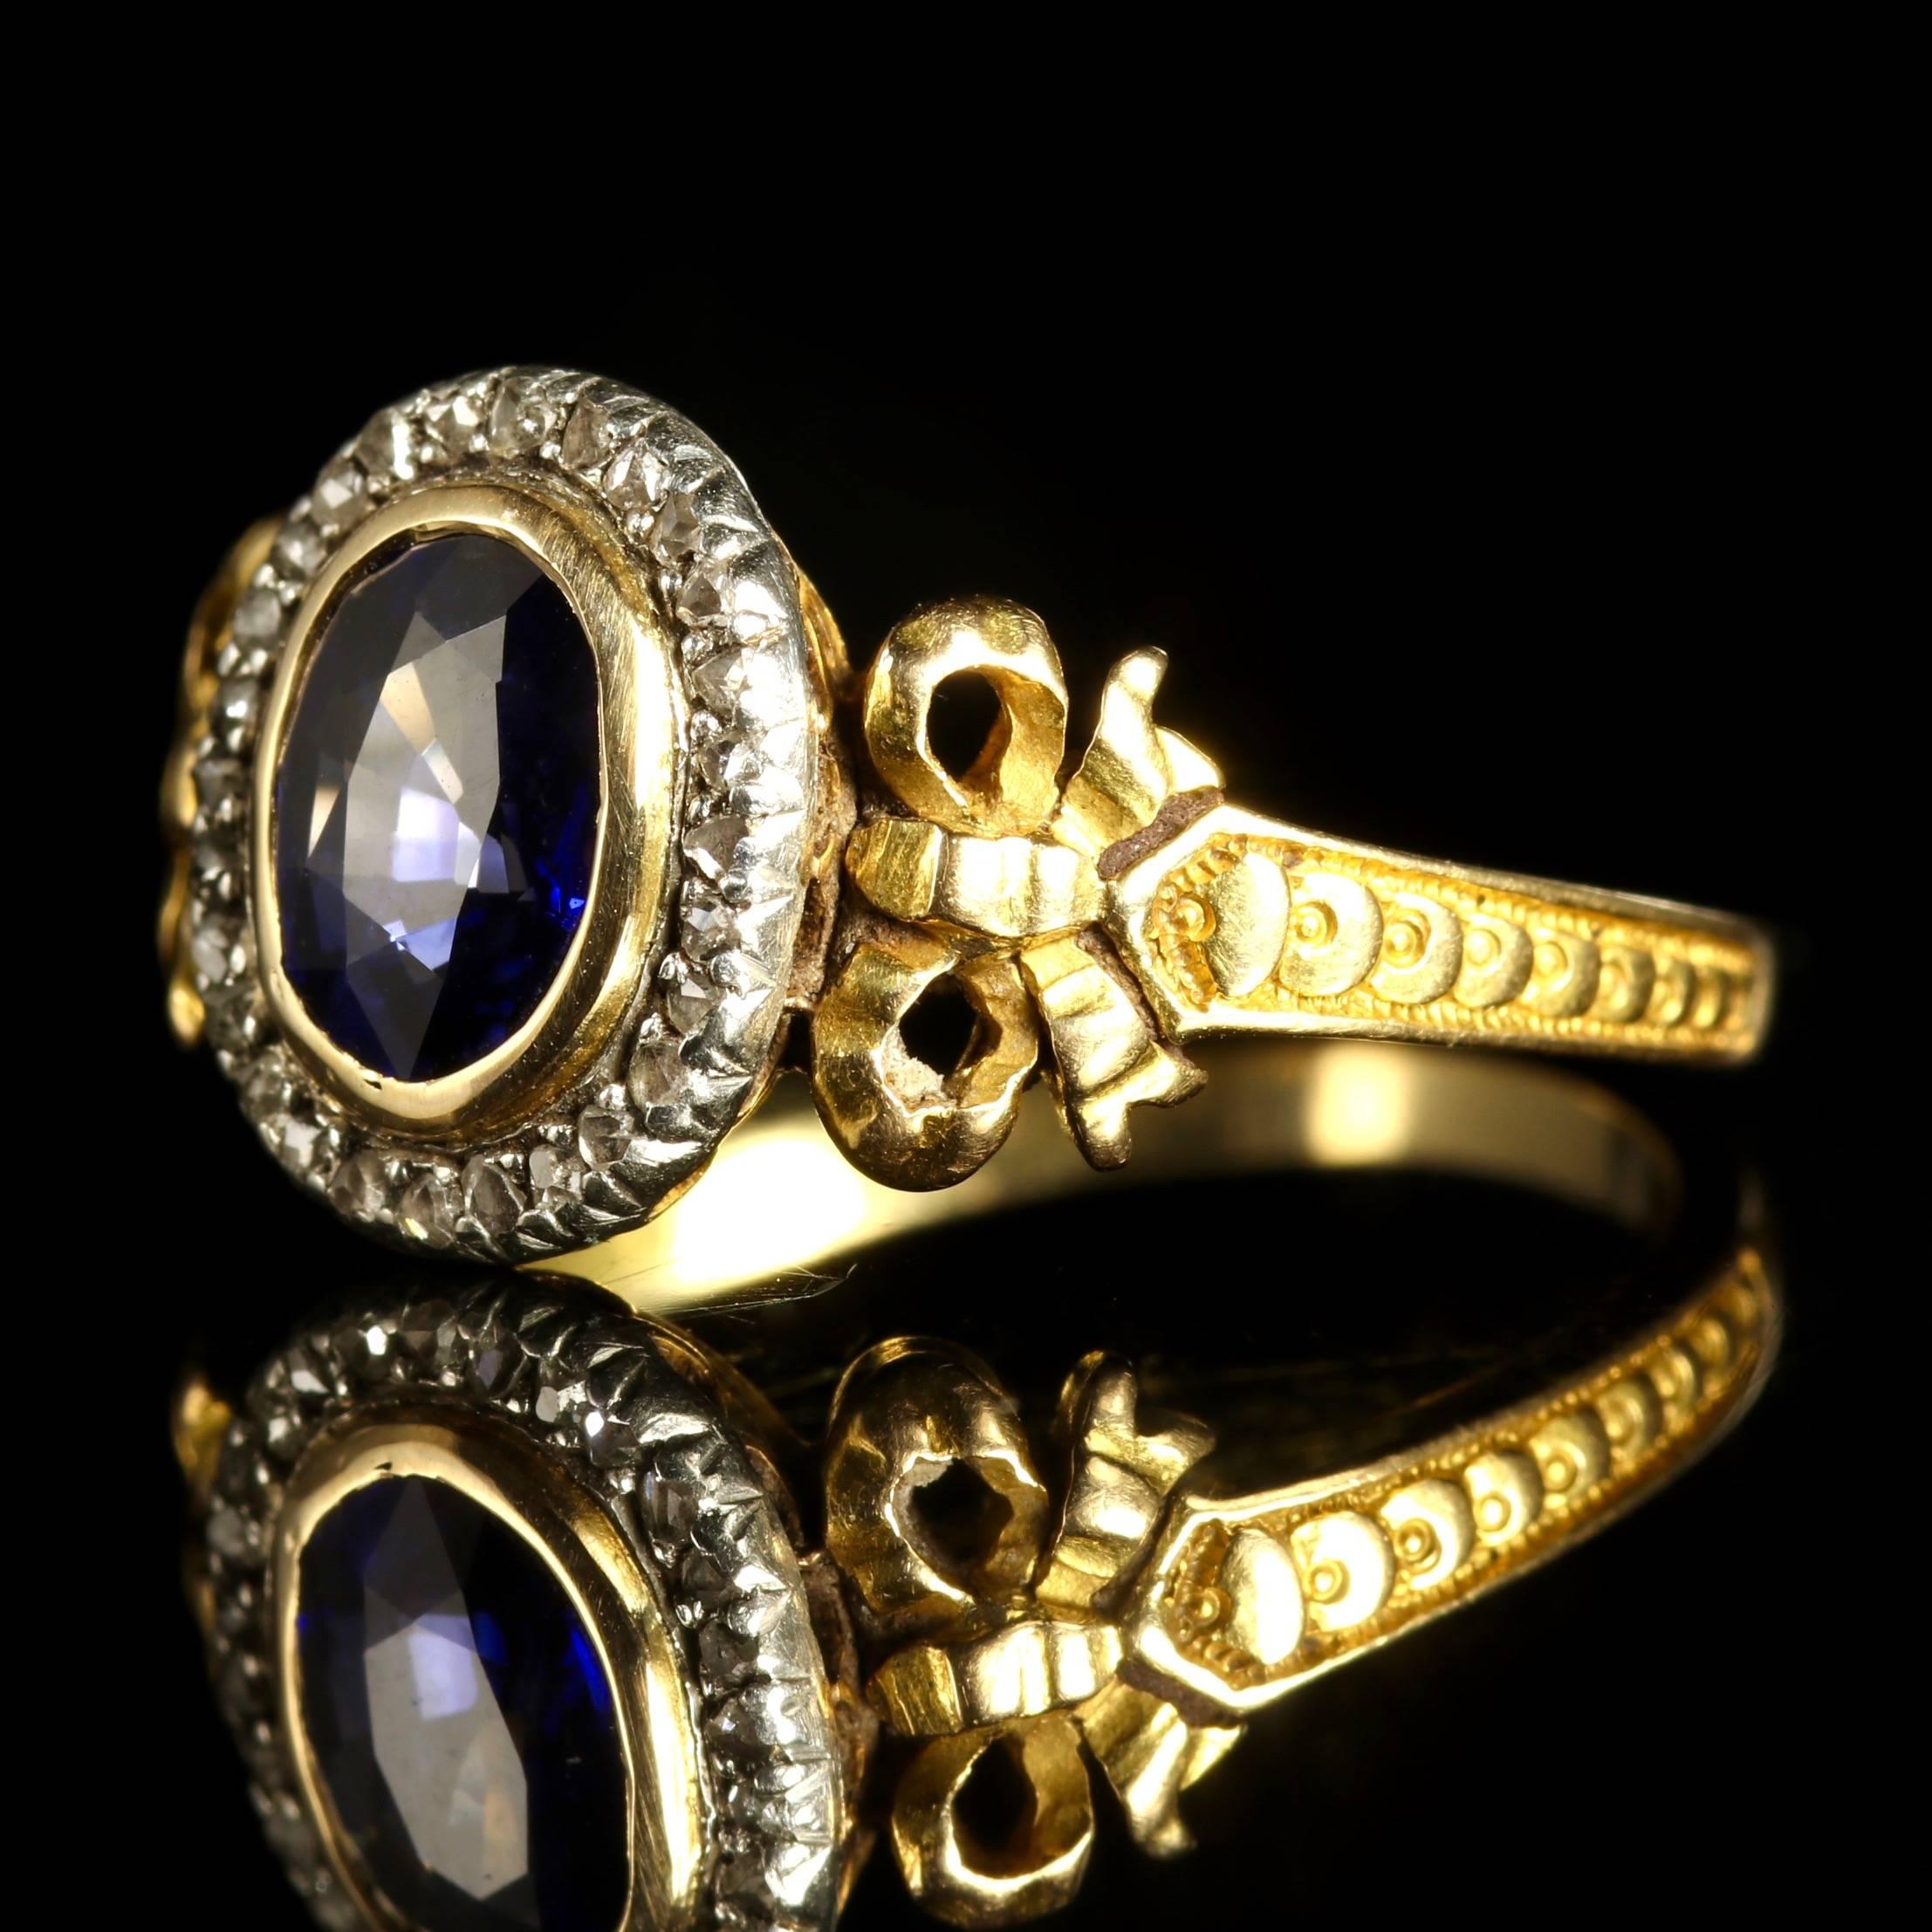 This fabulous, original French Sapphire and Diamond ring is Circa 1900.

The lovely natural Sapphire is 0.65ct which is surrounded by a halo of Diamonds.

Sapphire is the symbol of feelings of sympathy, harmony friendship and loyalty, everything